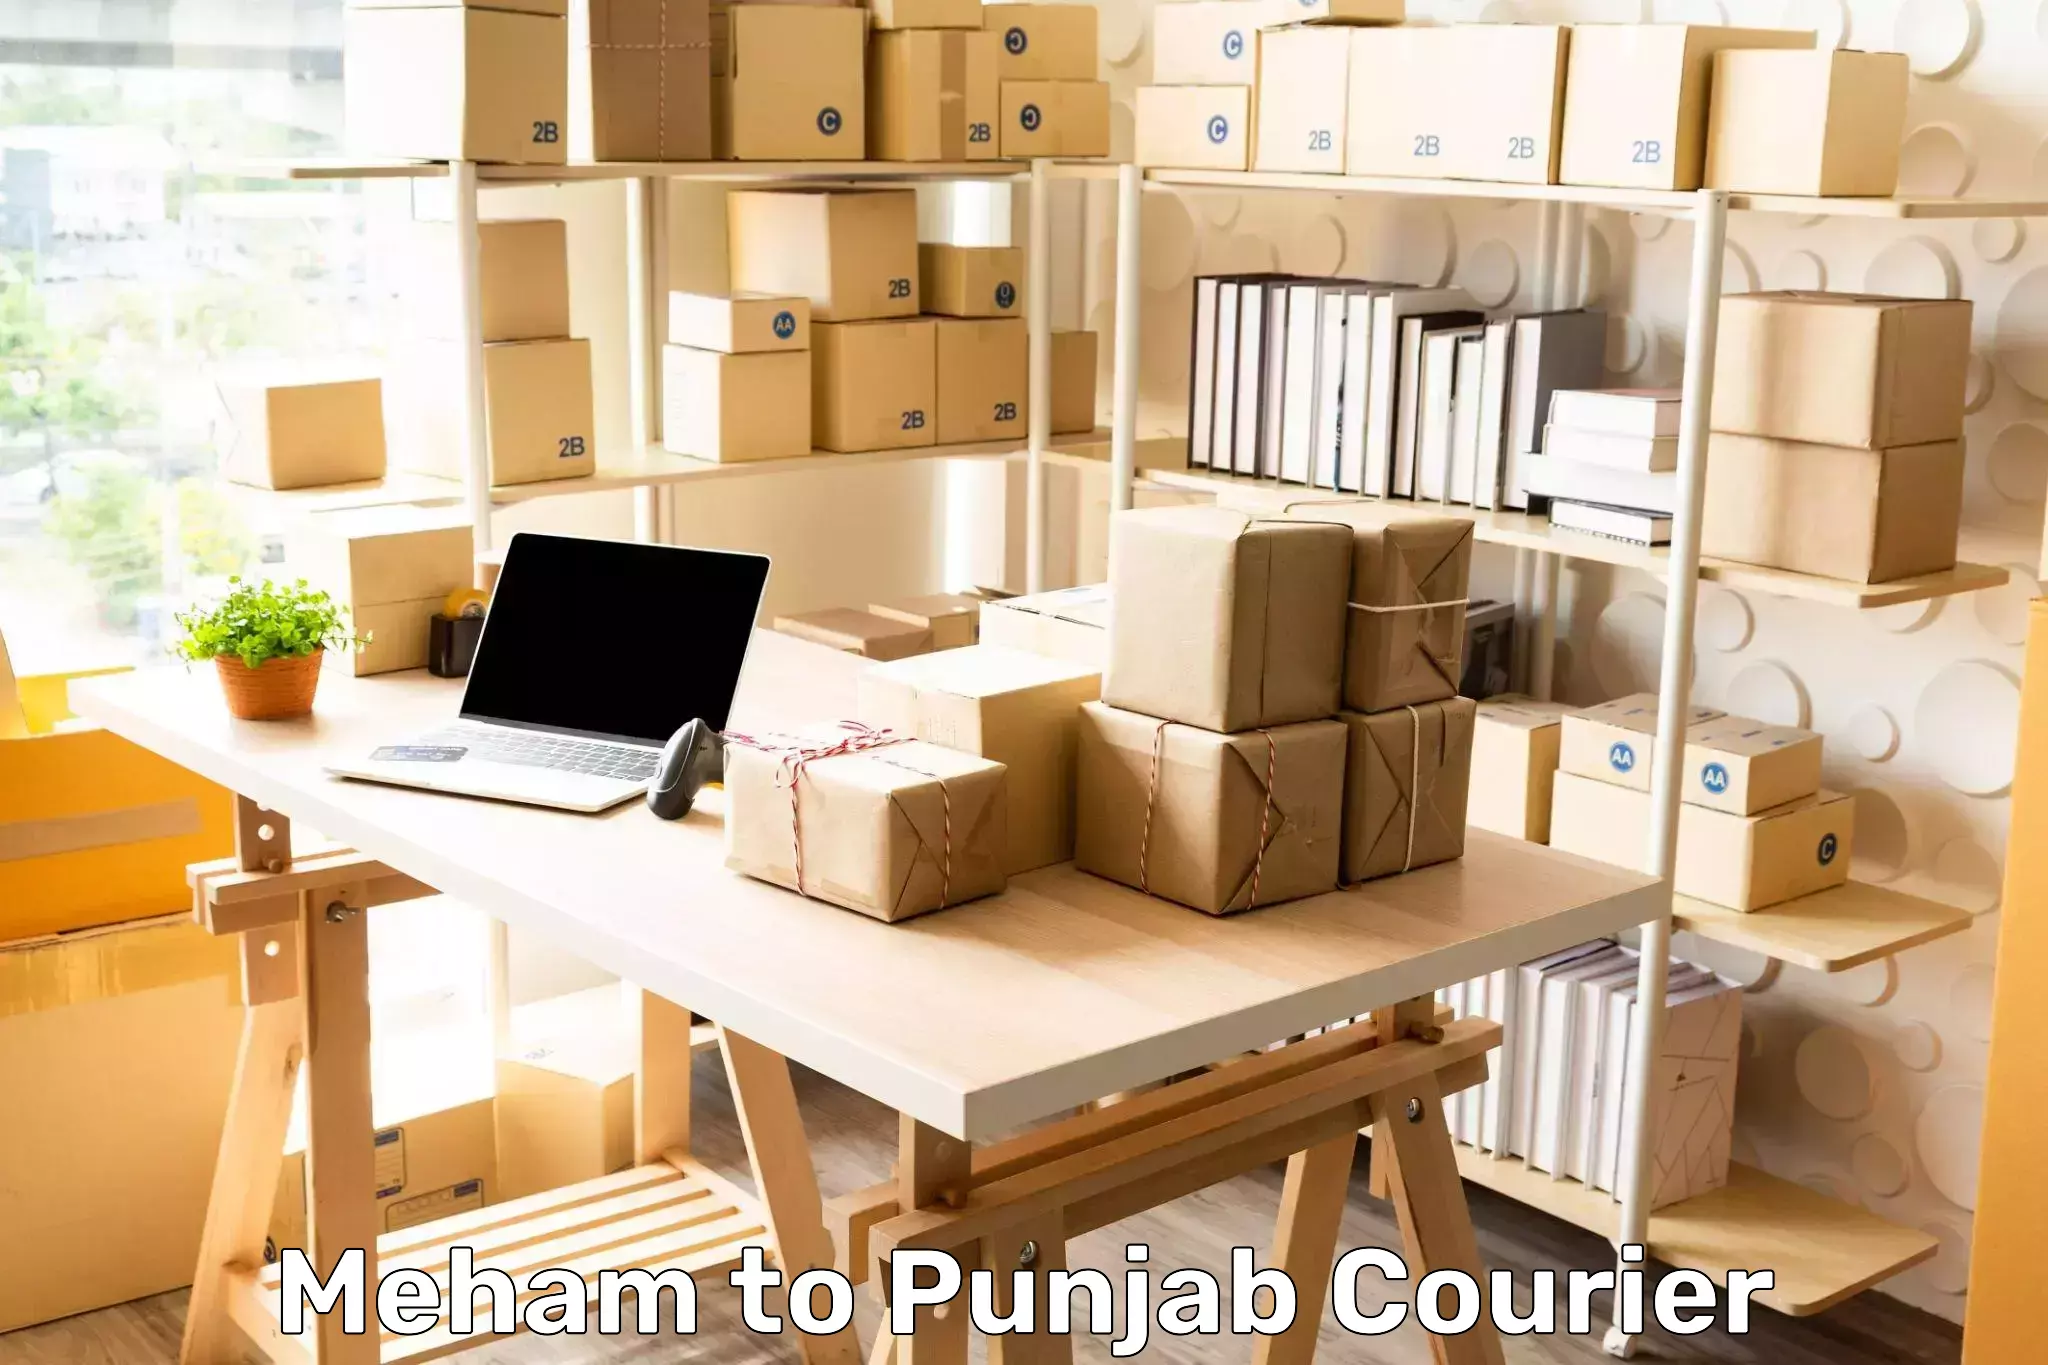 Local courier options Meham to Punjab